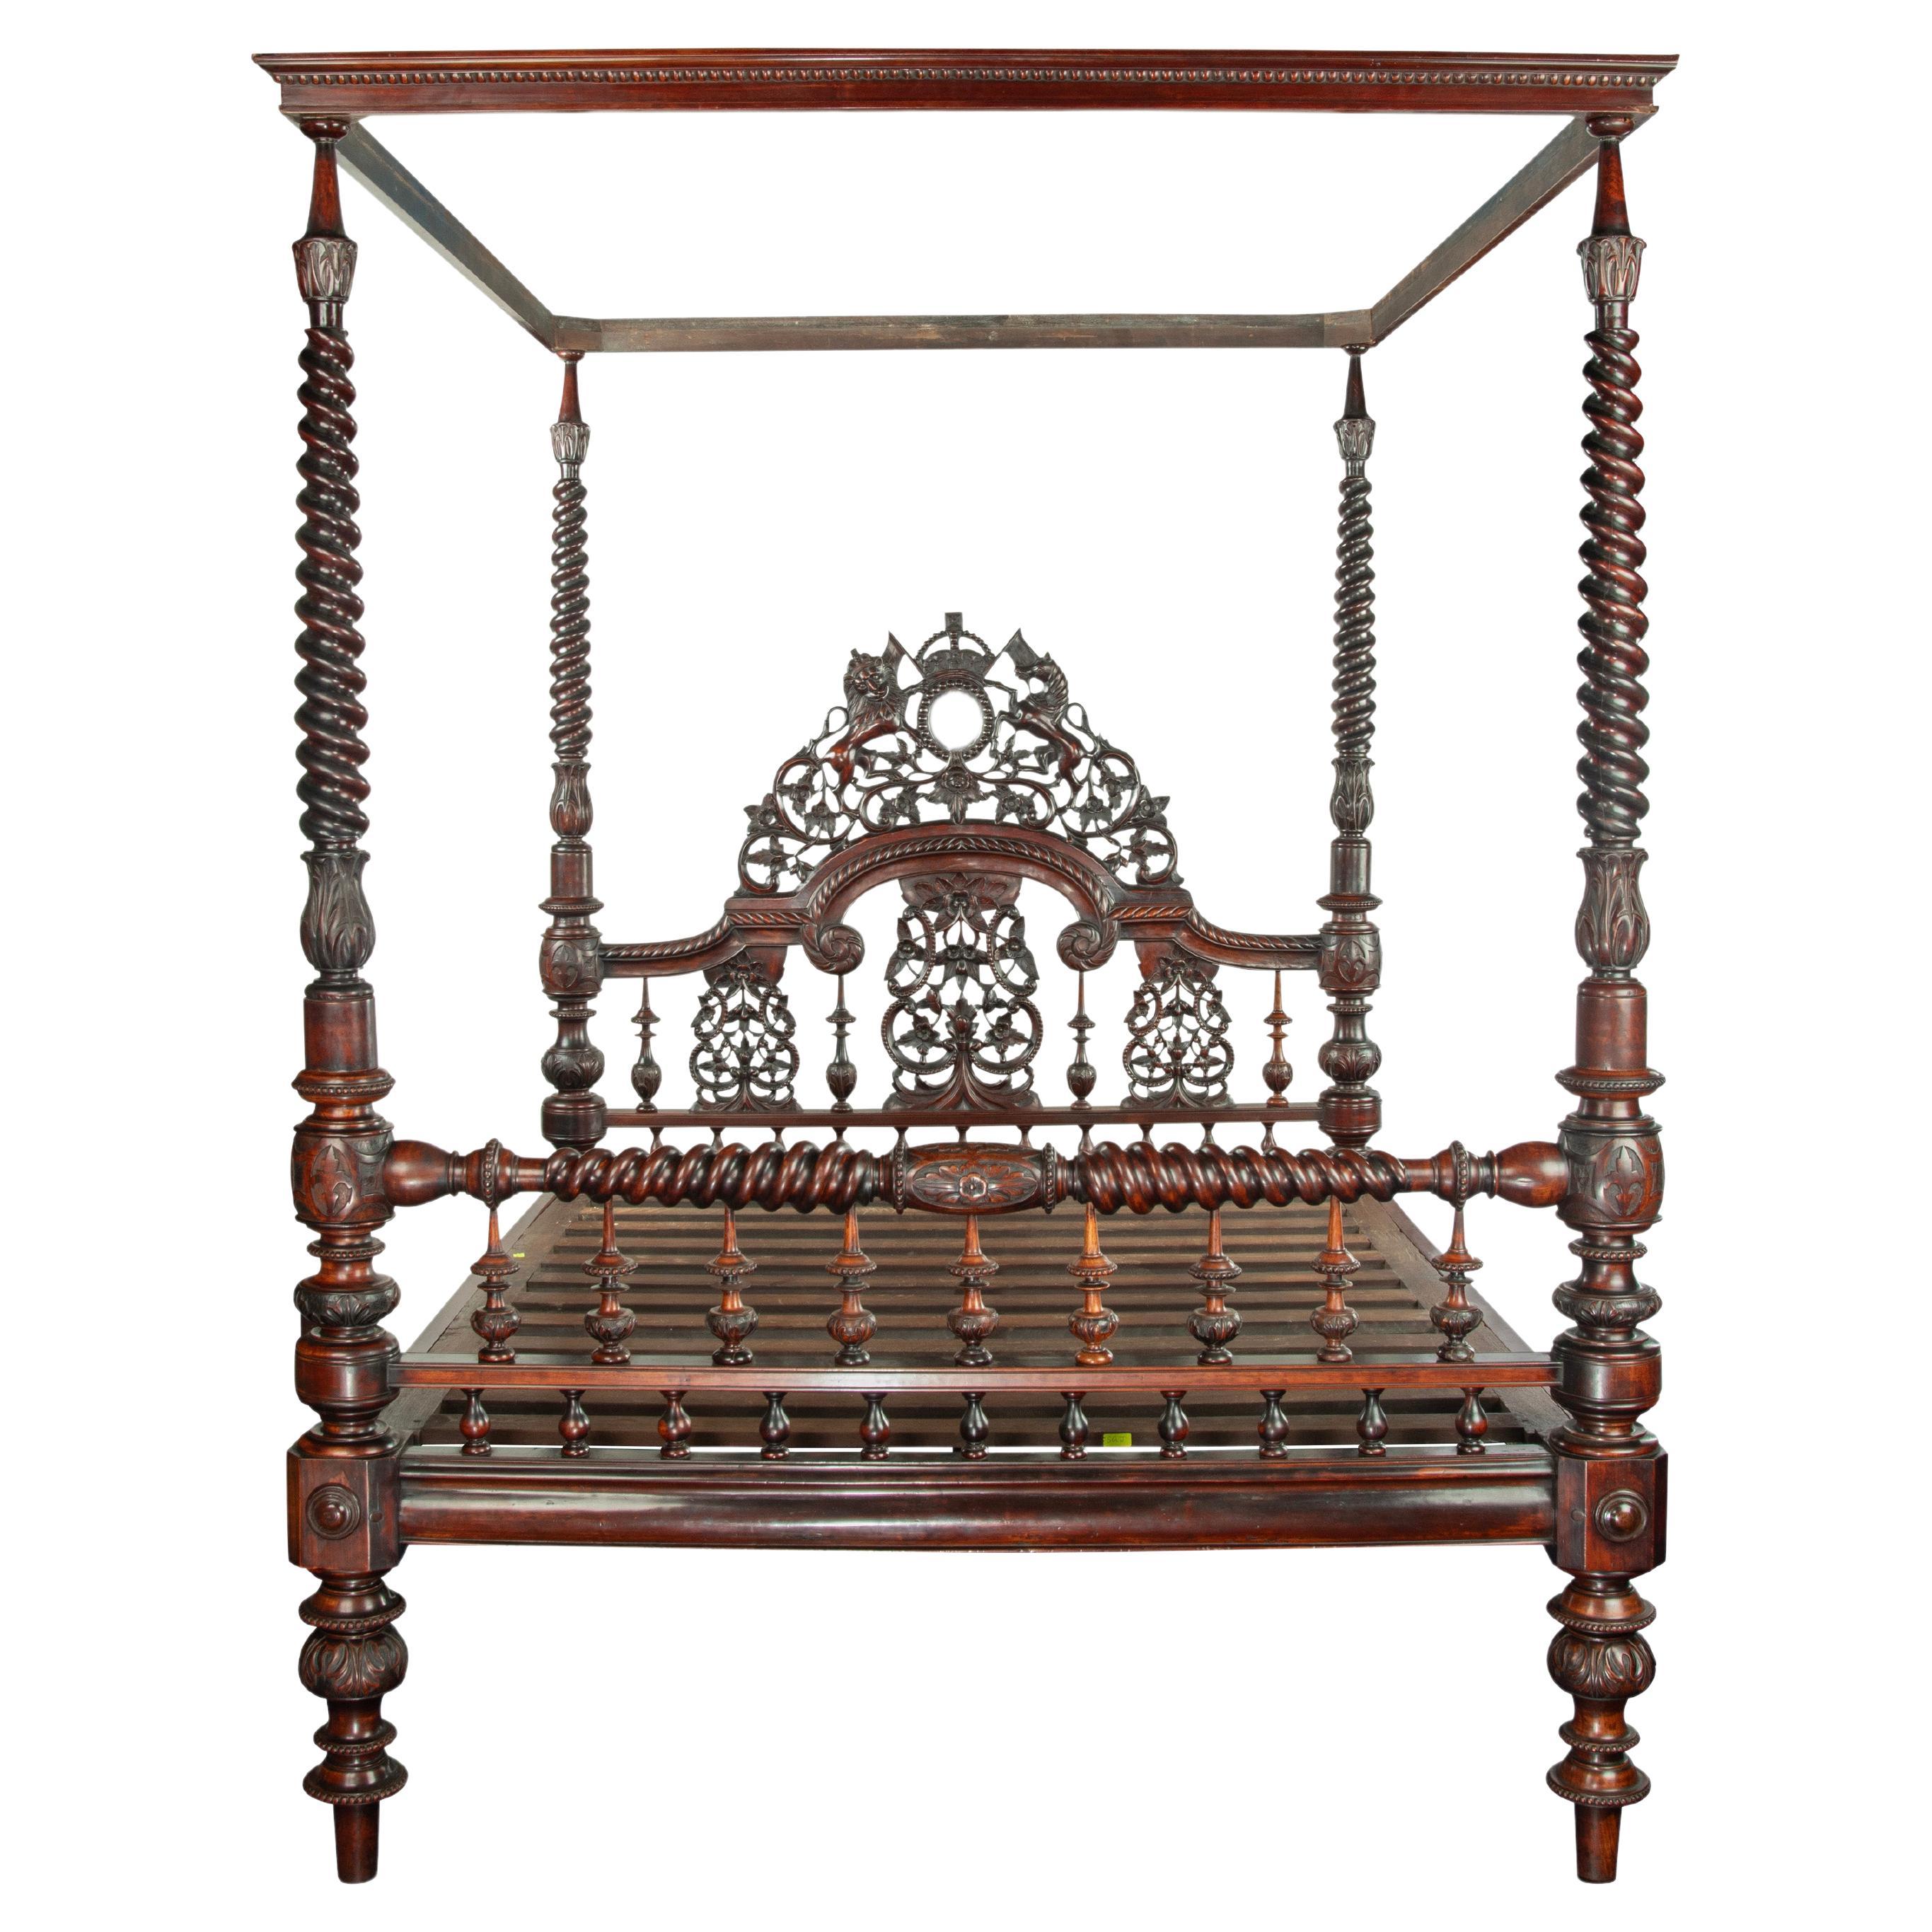 An impressive sissoo wood Anglo-Indian four poster bed